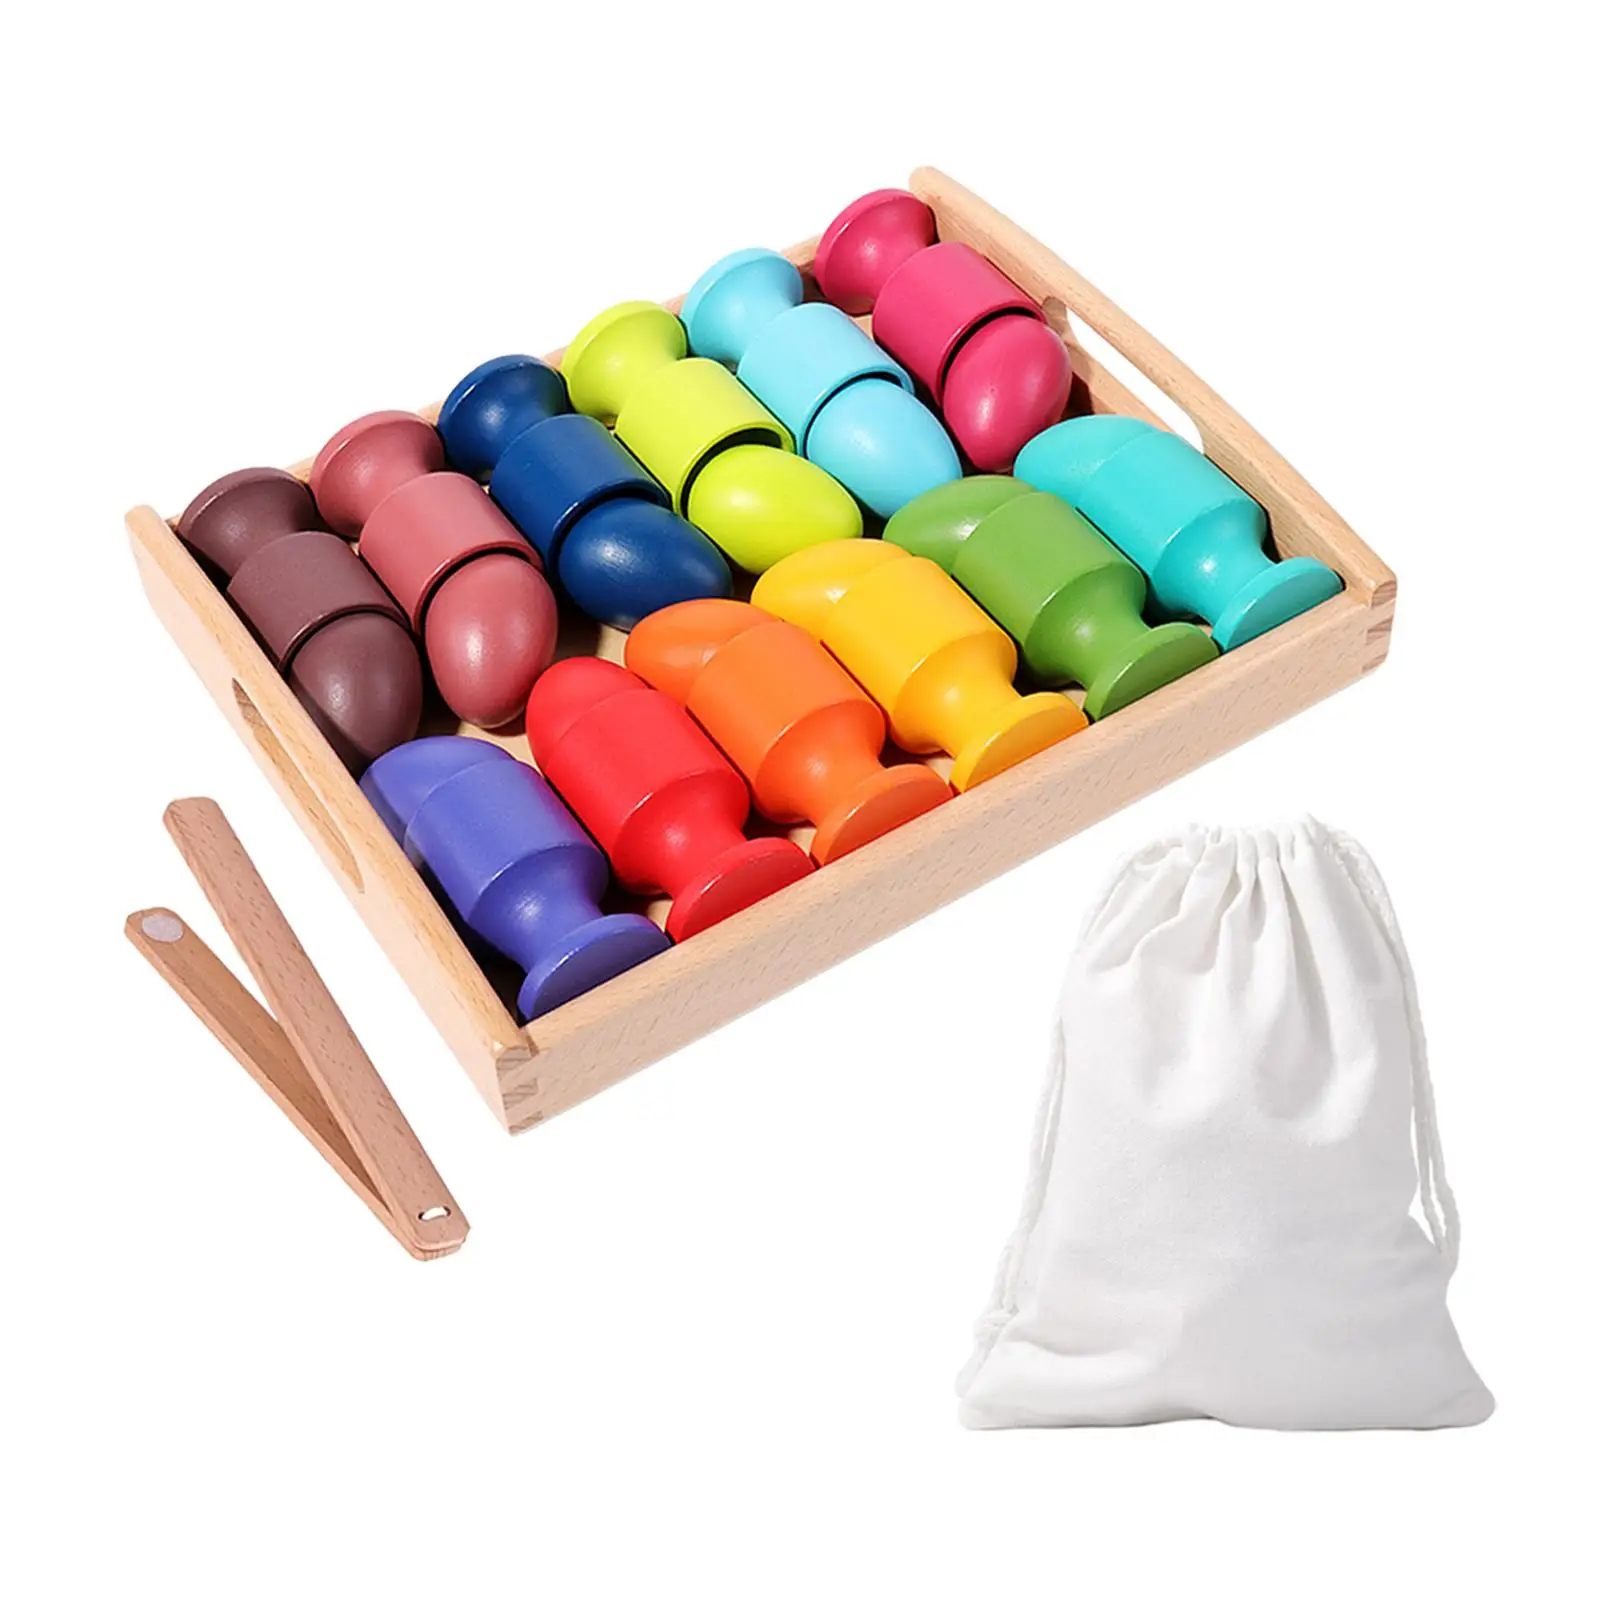 Egg Balls in Cups Preschool Learning Color Recognition Wooden Color Sorting Toys for Boys Girls Toddlers Children Baby Kids